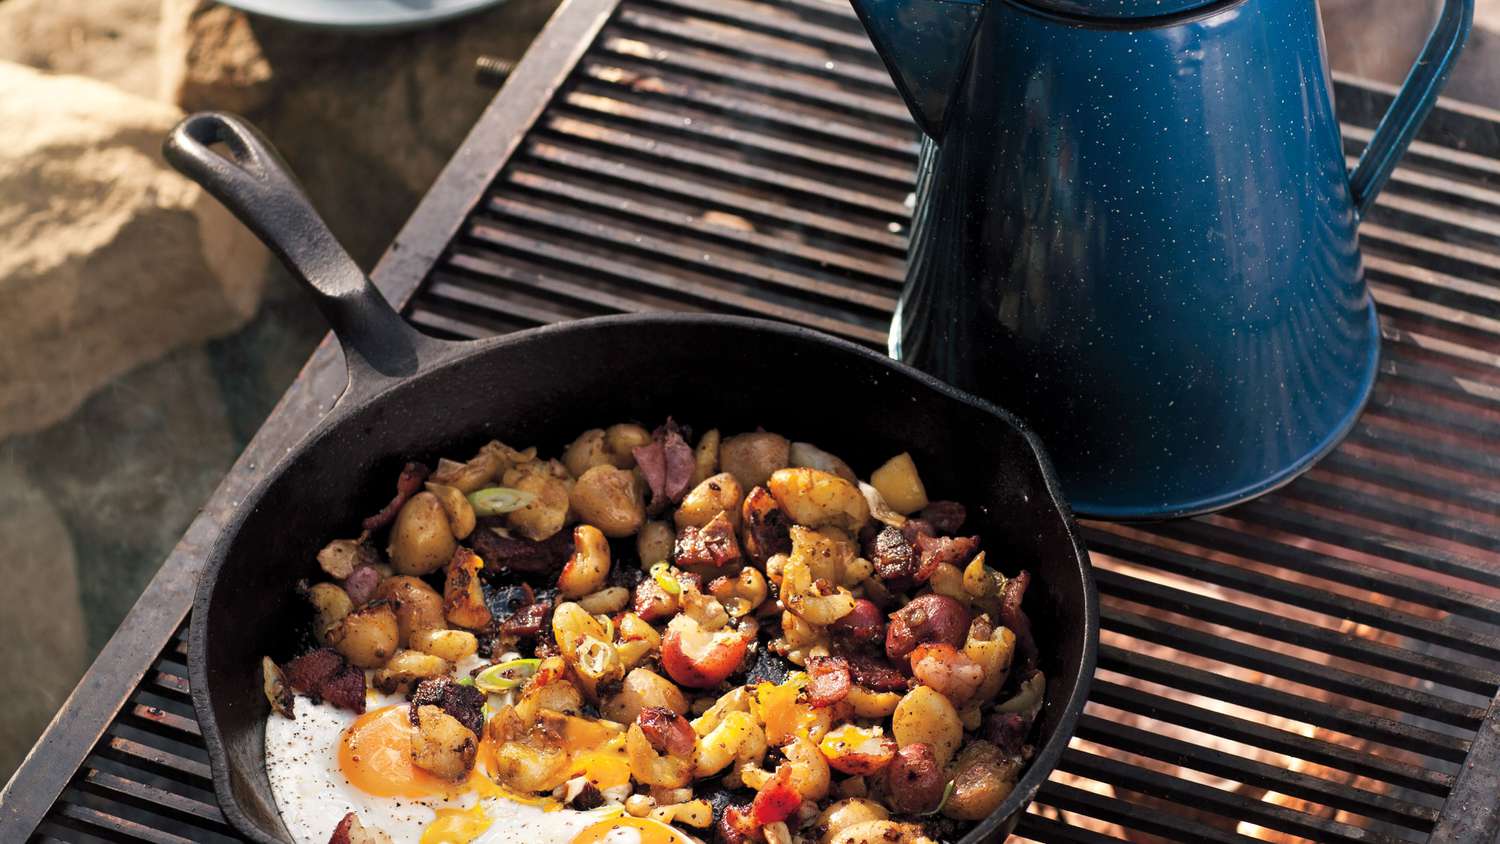 The Outdoorsman: Eggs and Potato Hash with Bacon